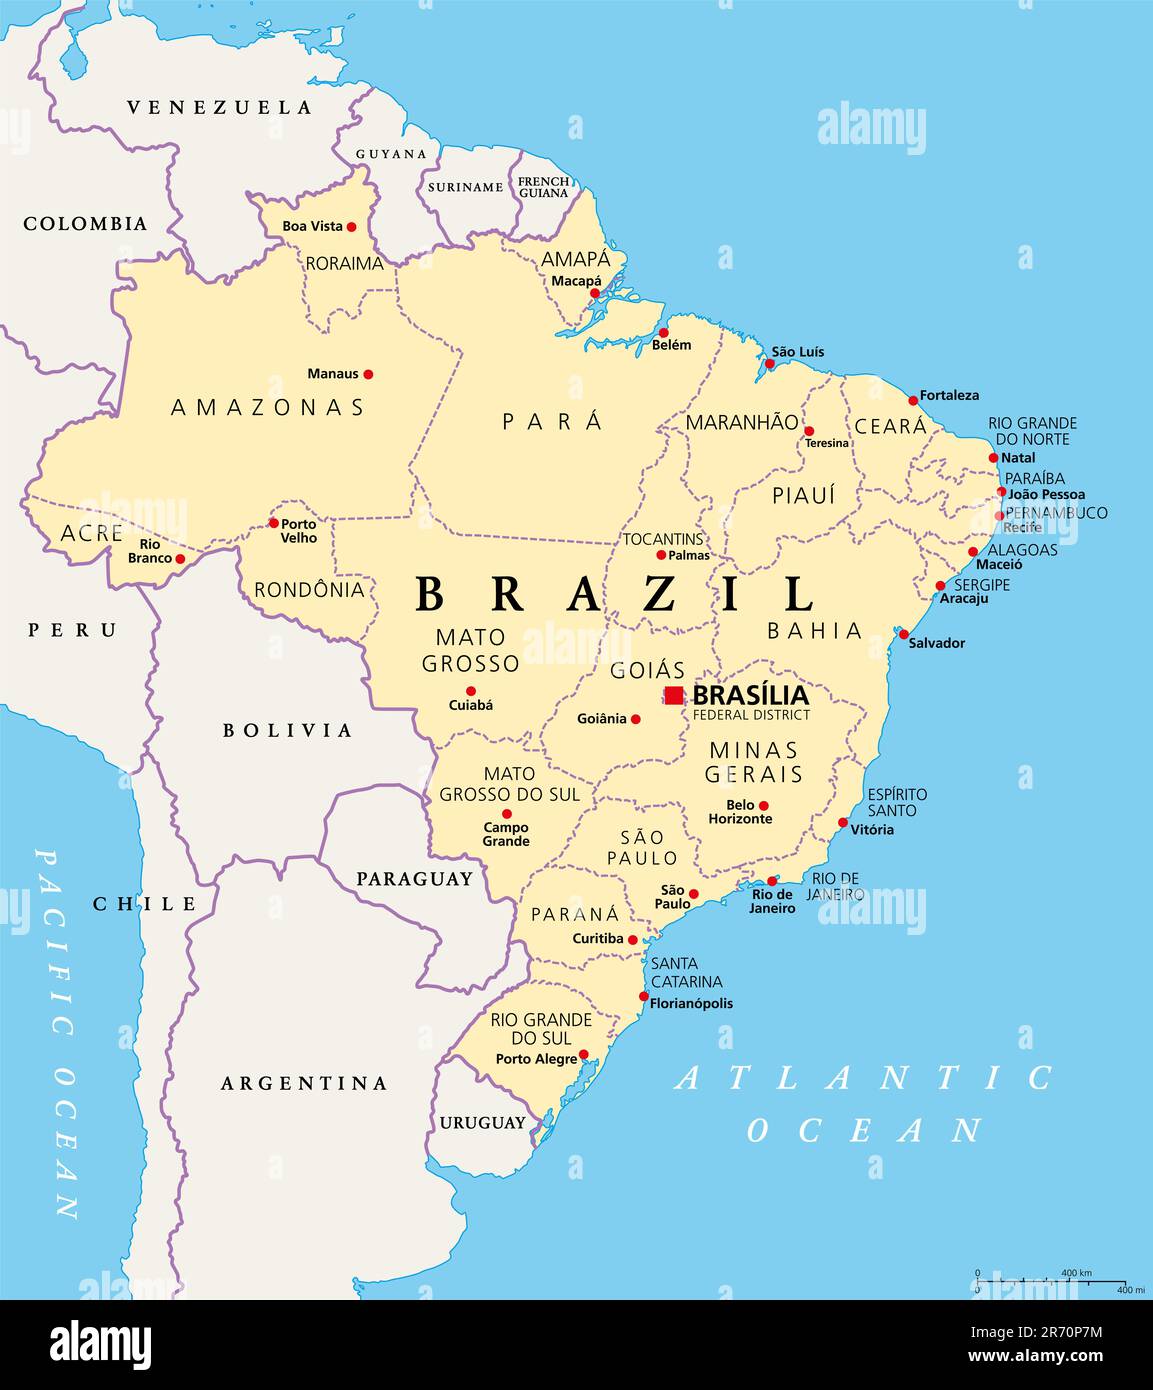 https://c8.alamy.com/comp/2R70P7M/states-of-brazil-political-map-federative-units-with-borders-and-capitals-subnational-entities-with-a-certain-degree-of-autonomy-2R70P7M.jpg